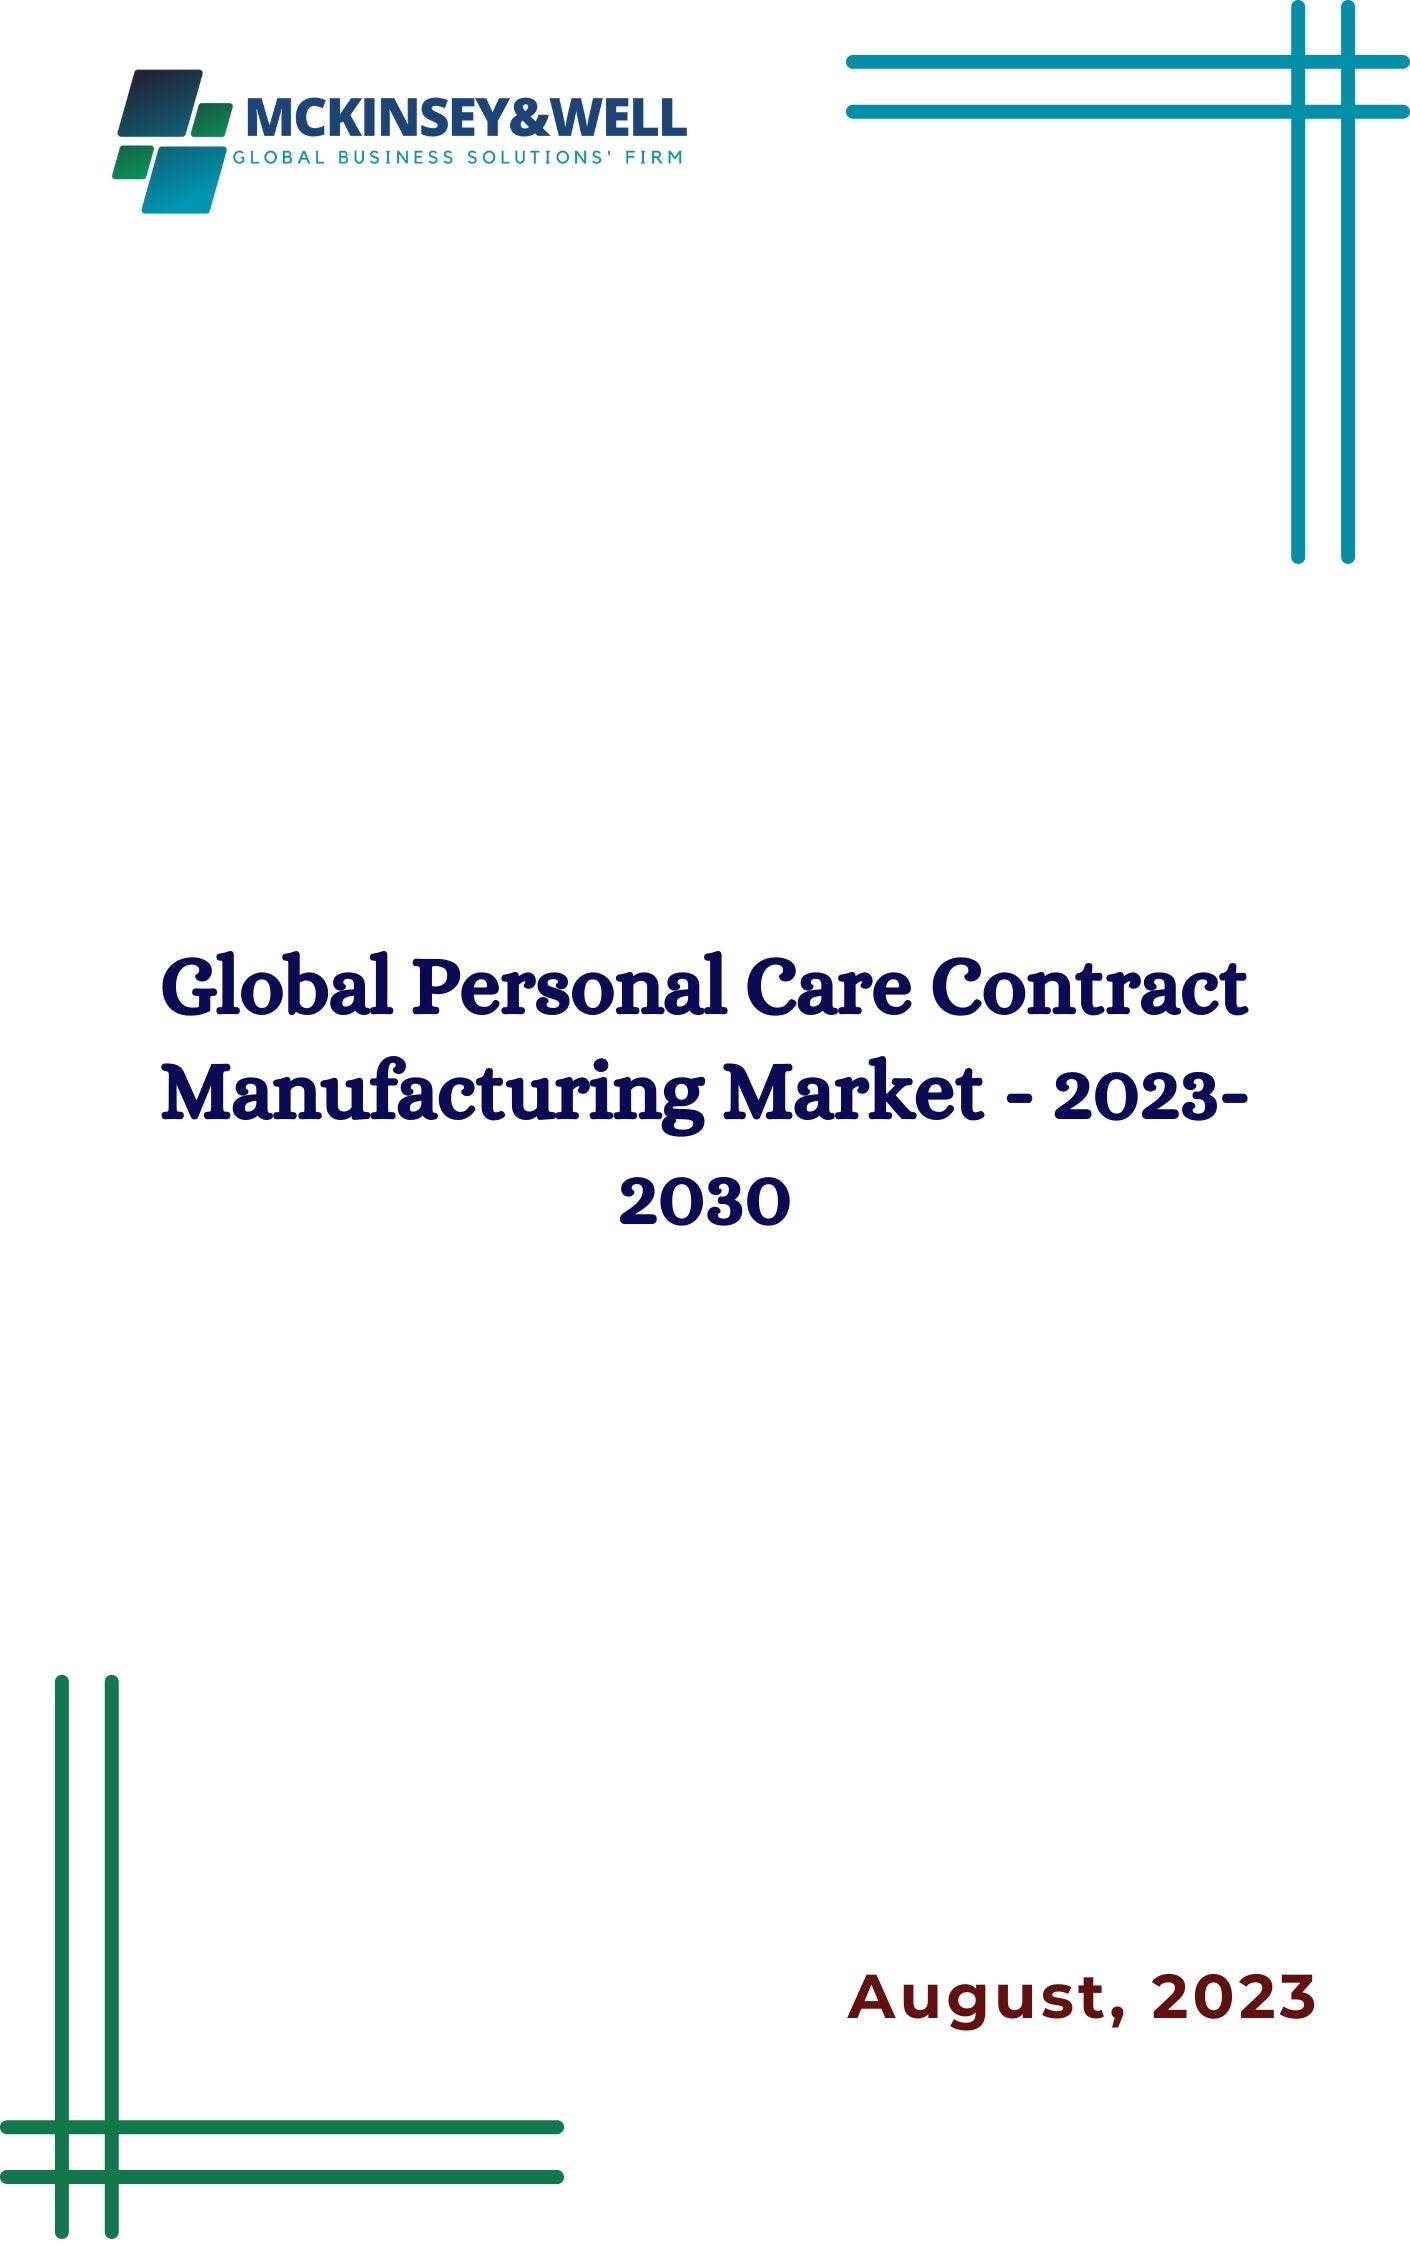 Global Personal Care Contract Manufacturing Market - 2023-2030